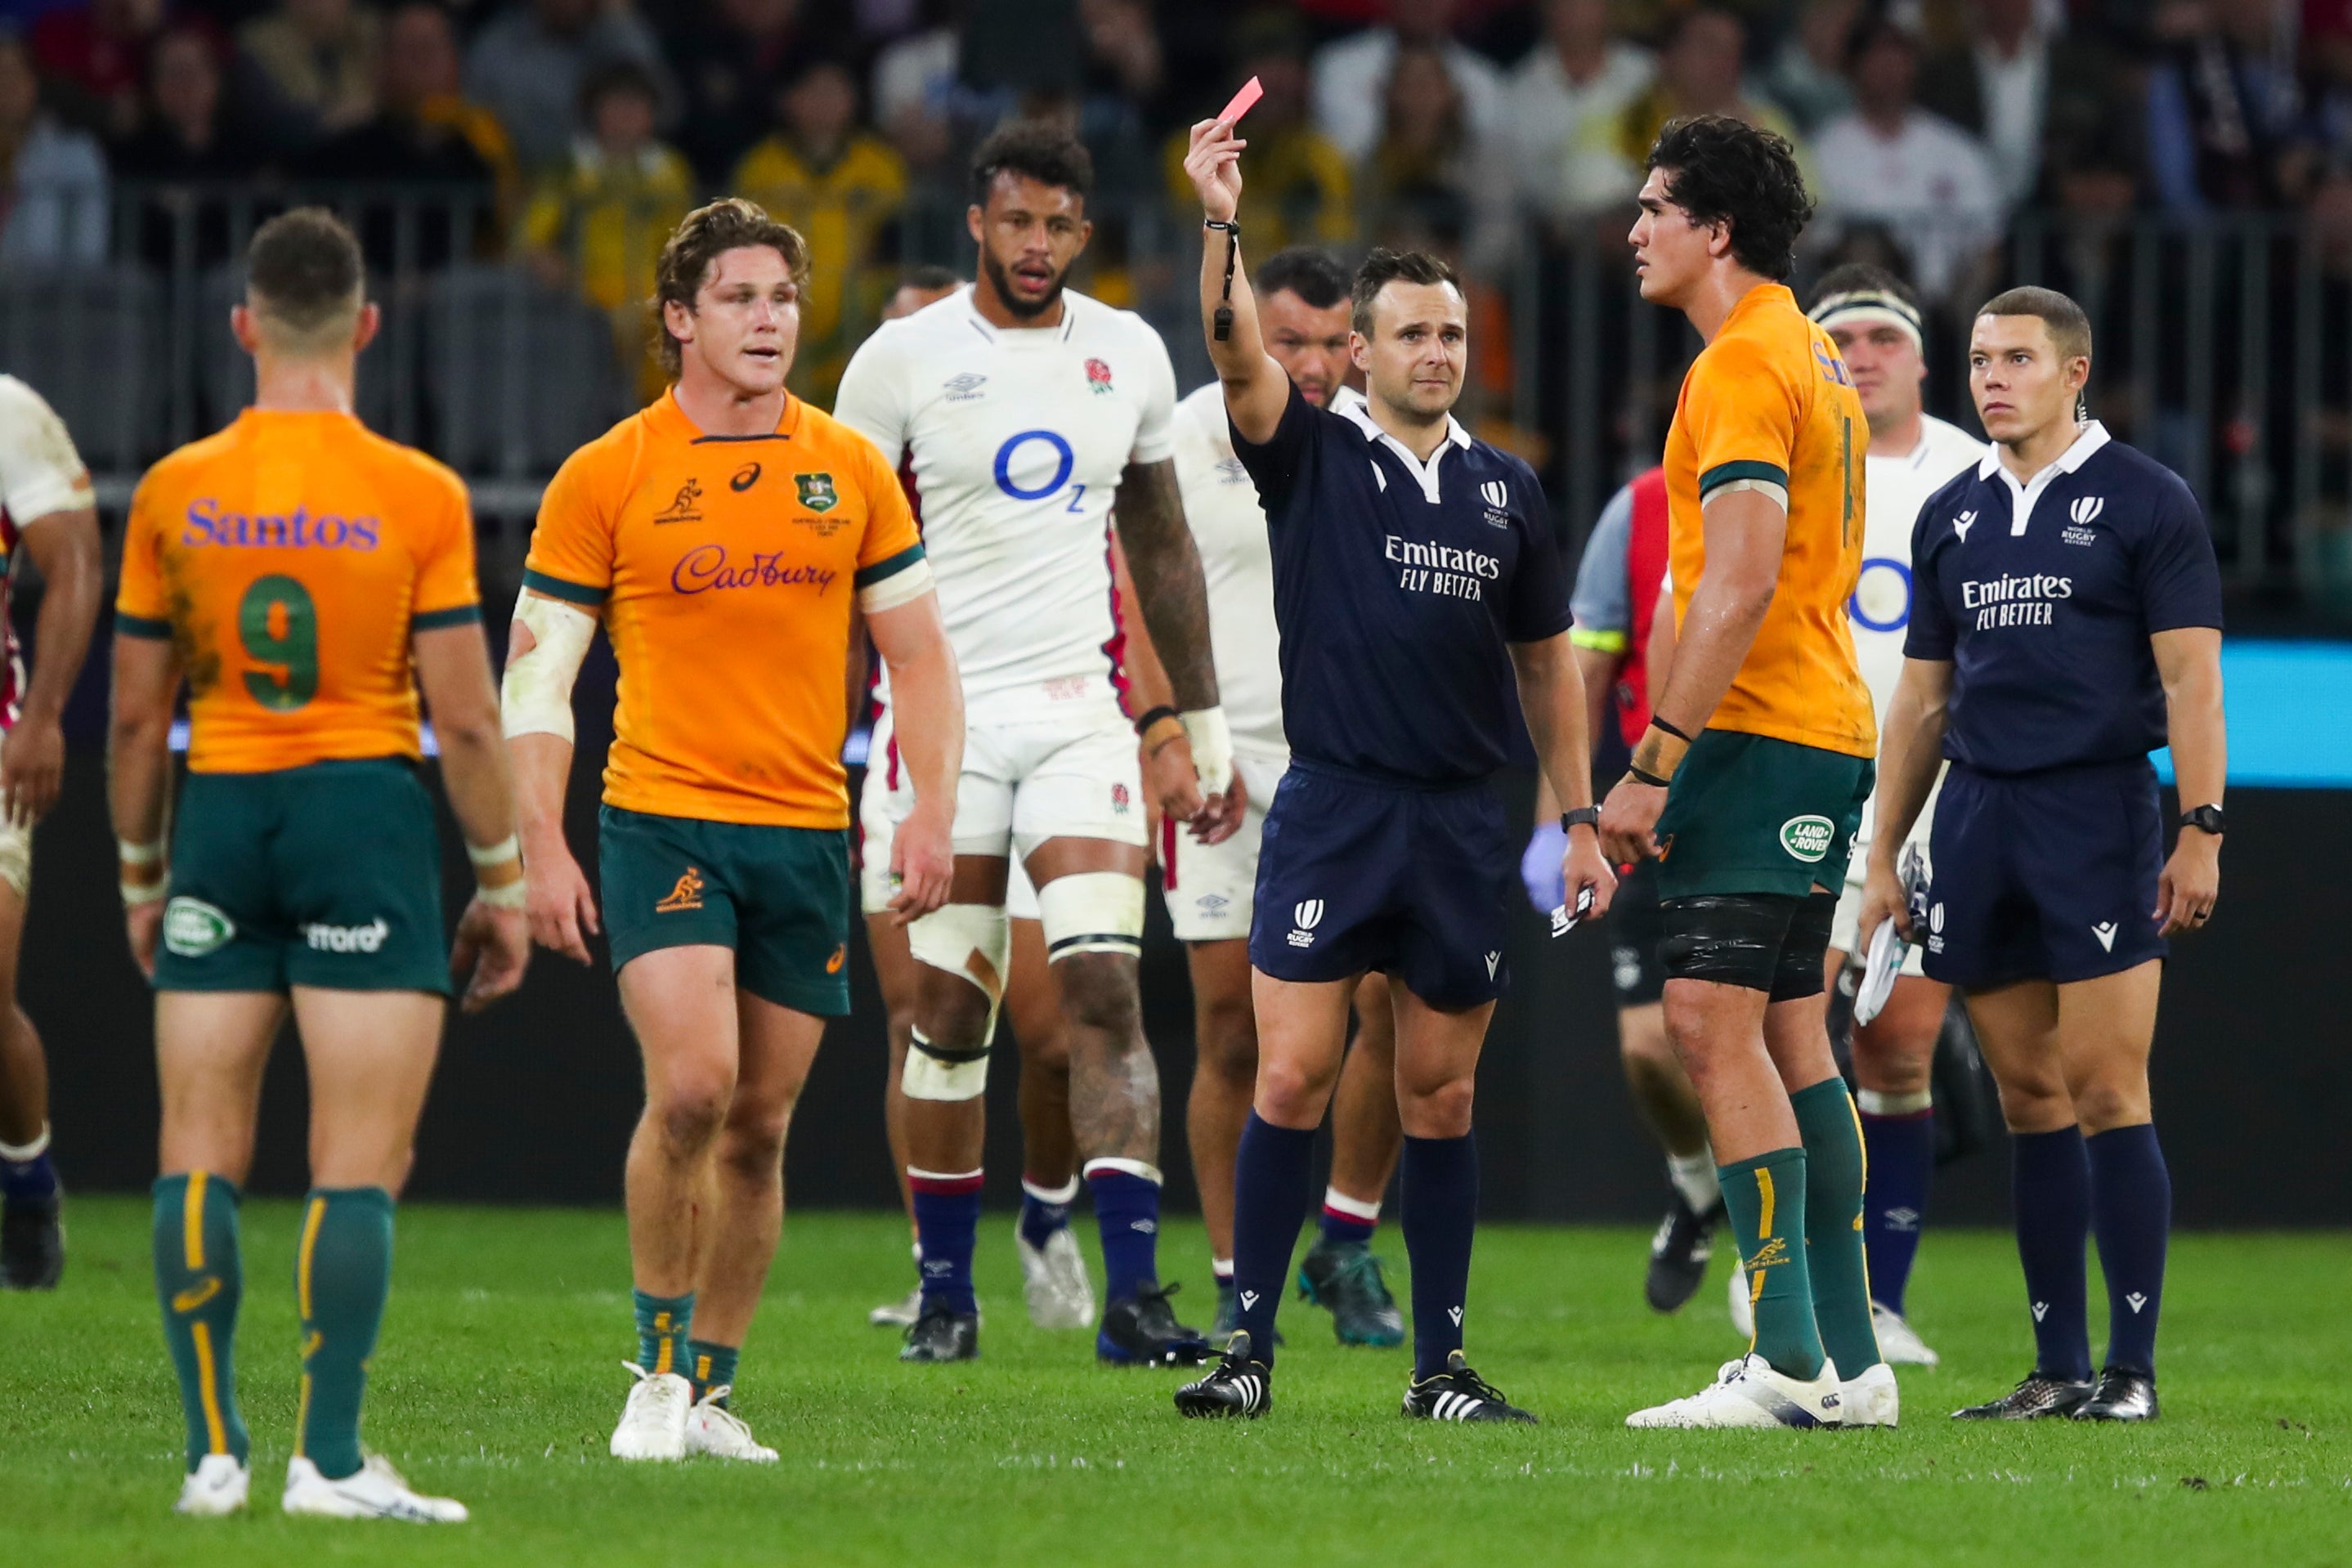 Australia’s Darcy Swain was shown a red card